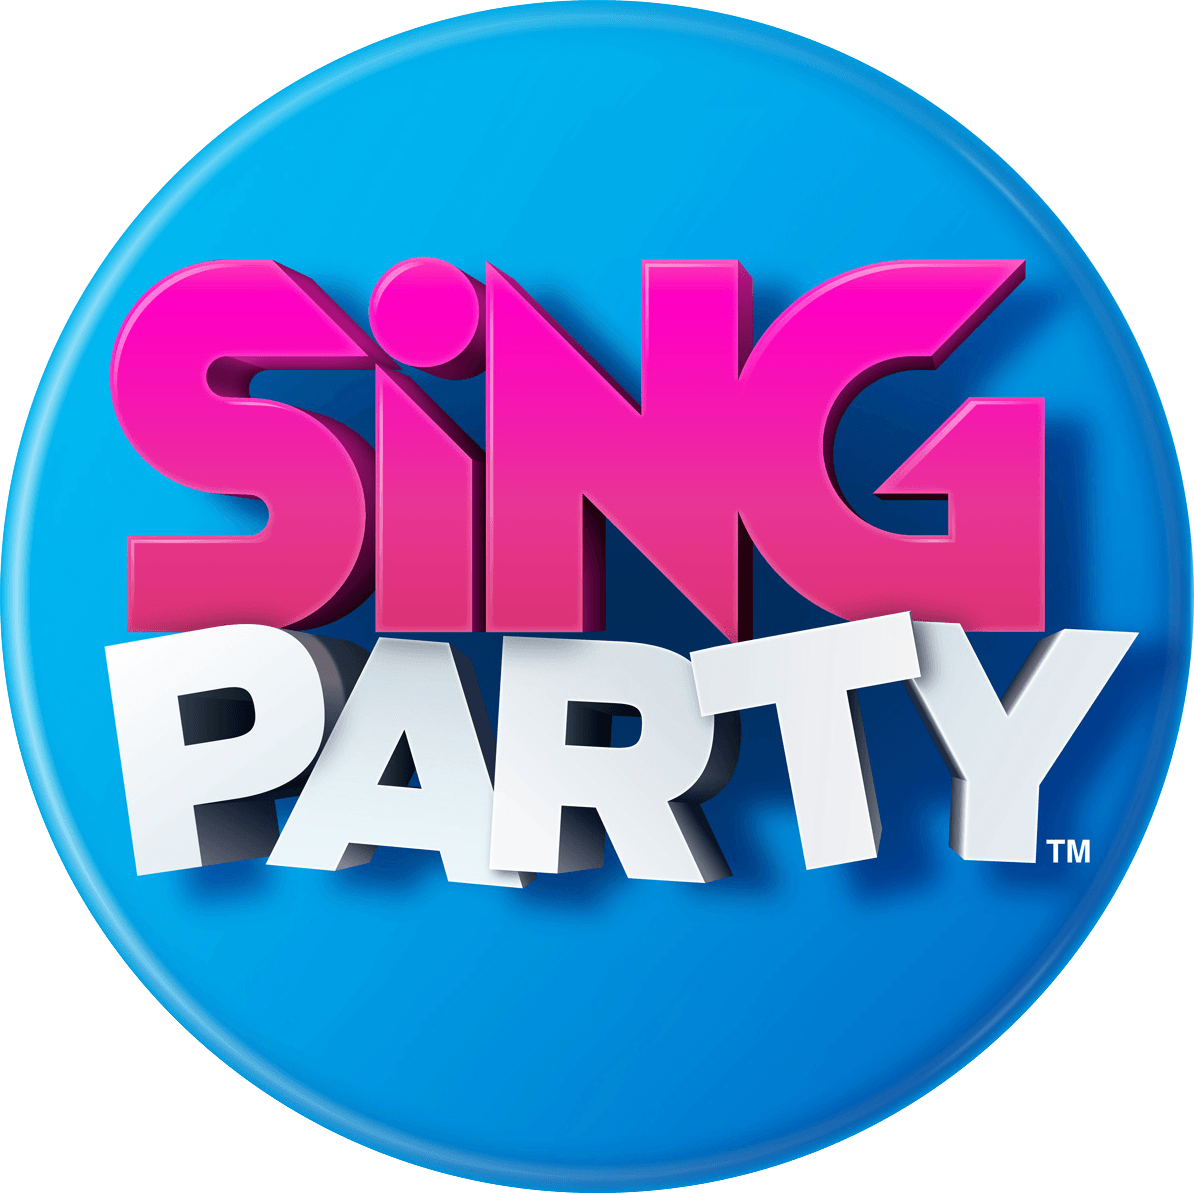 Party Logo - Party logo png 7 PNG Image